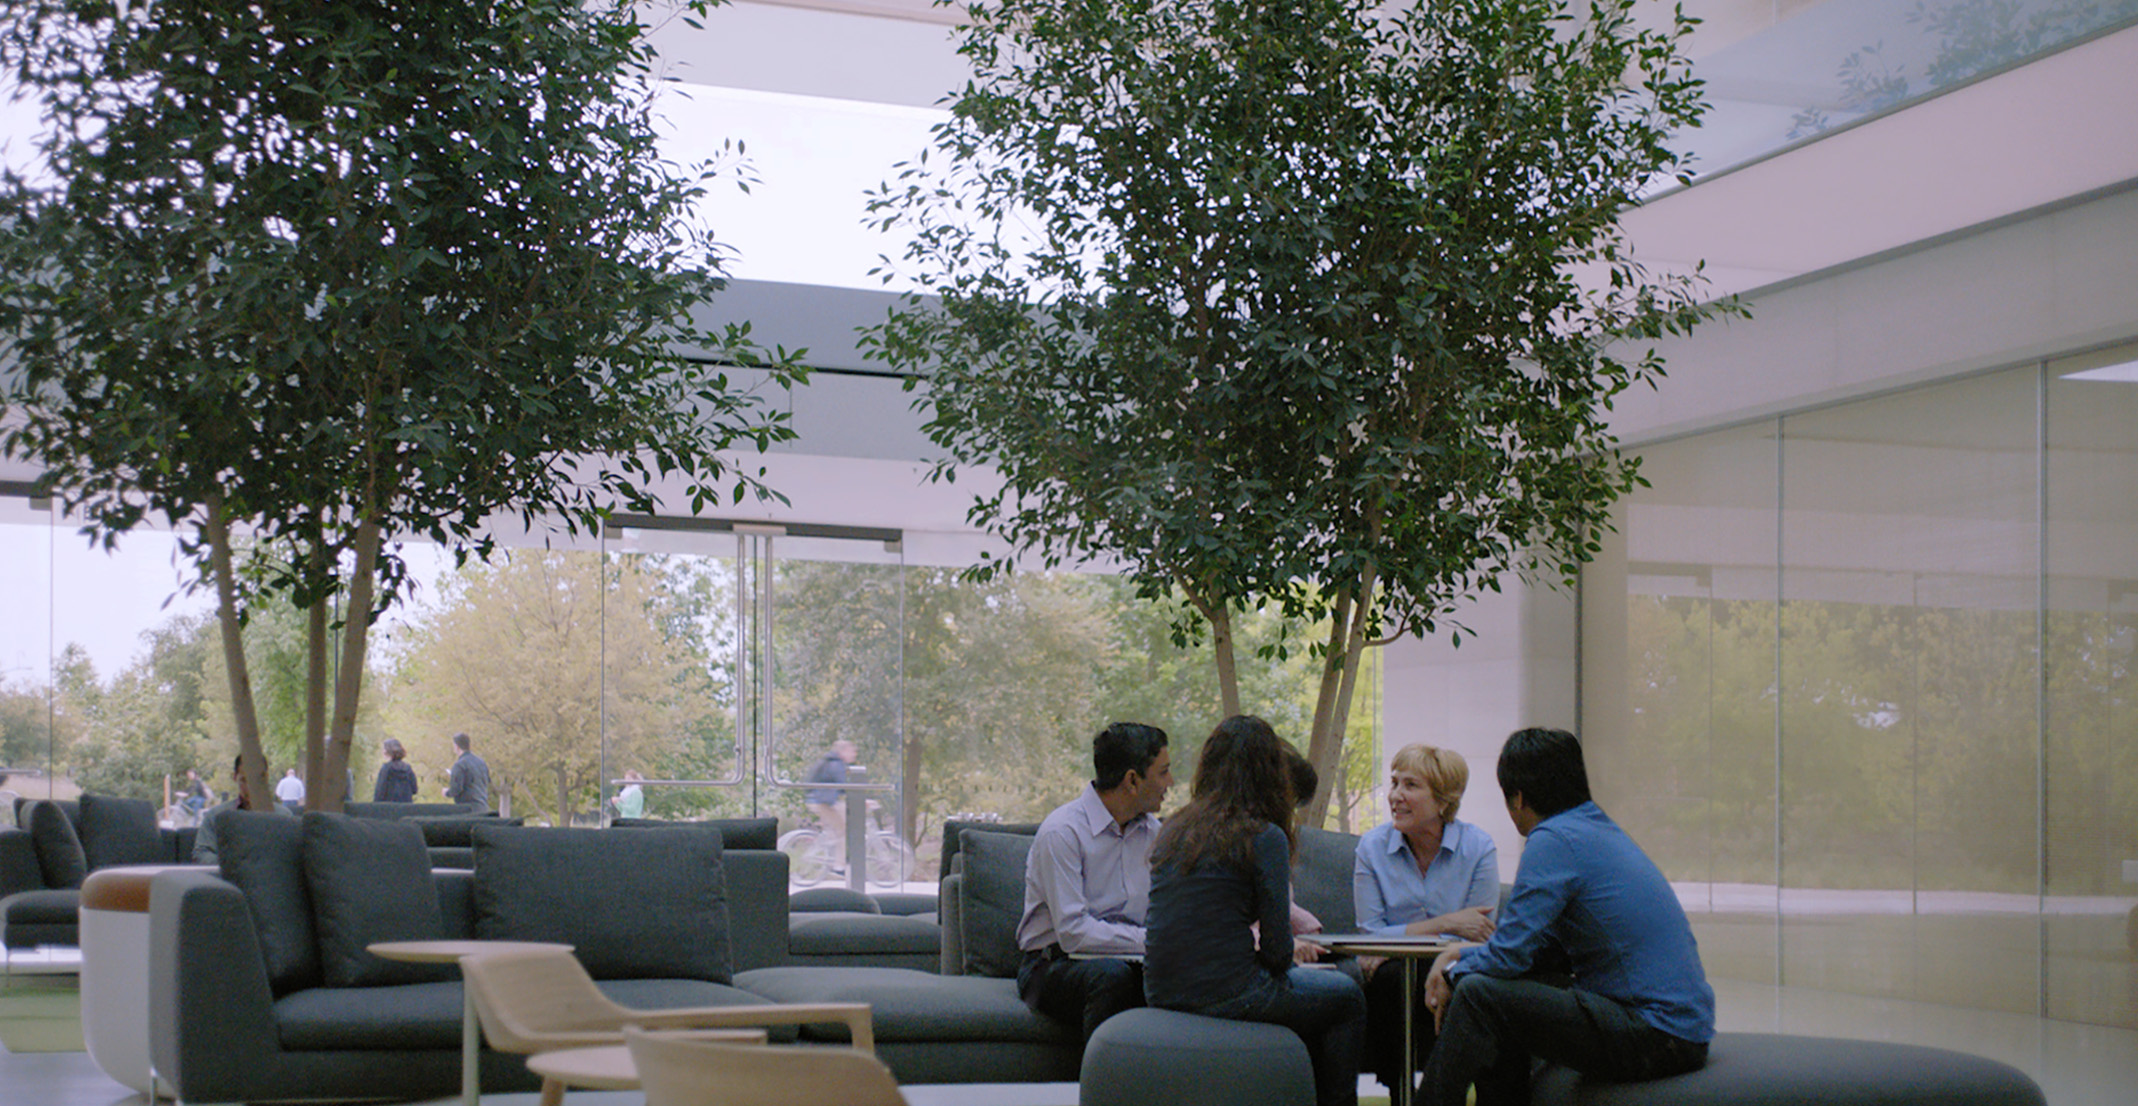 Giulia, who leads a natural language processing team, sits at a table along with other Apple employees.